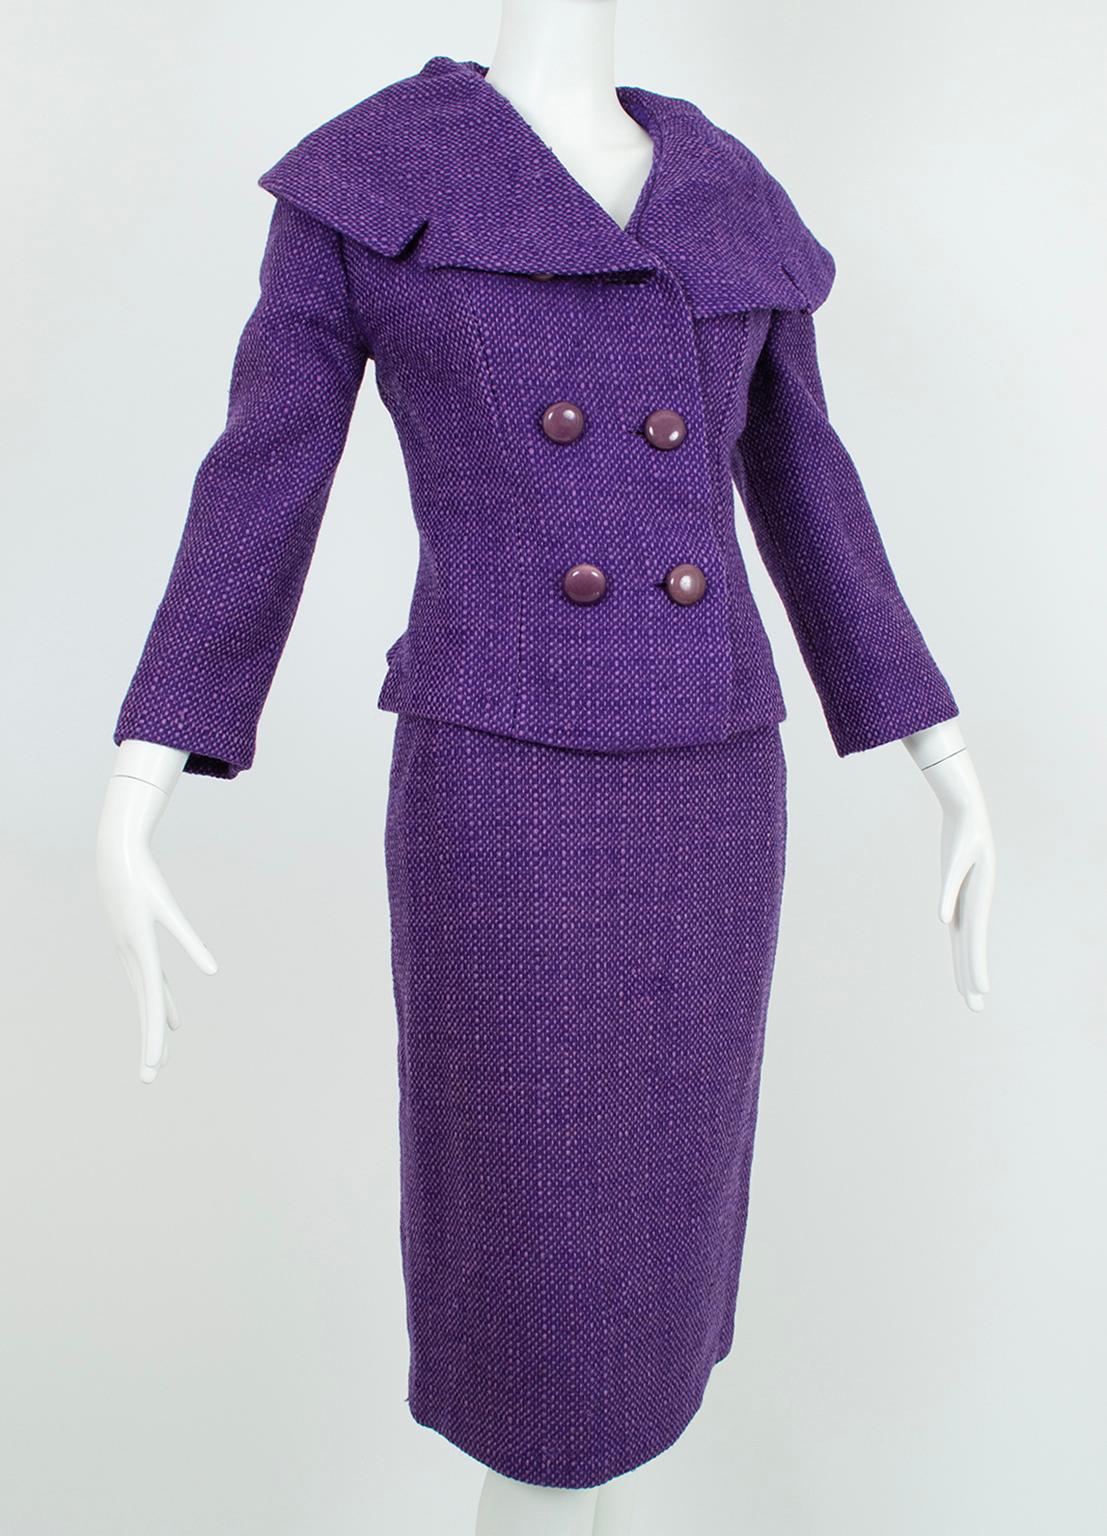 Regal in color, this extraordinary suit is made even more spectacular by its masterful construction, feminine silhouette and triumphant matching Inverness coat. Traffic-stopping without the coat, the suit features a dramatic shoulder-width portrait